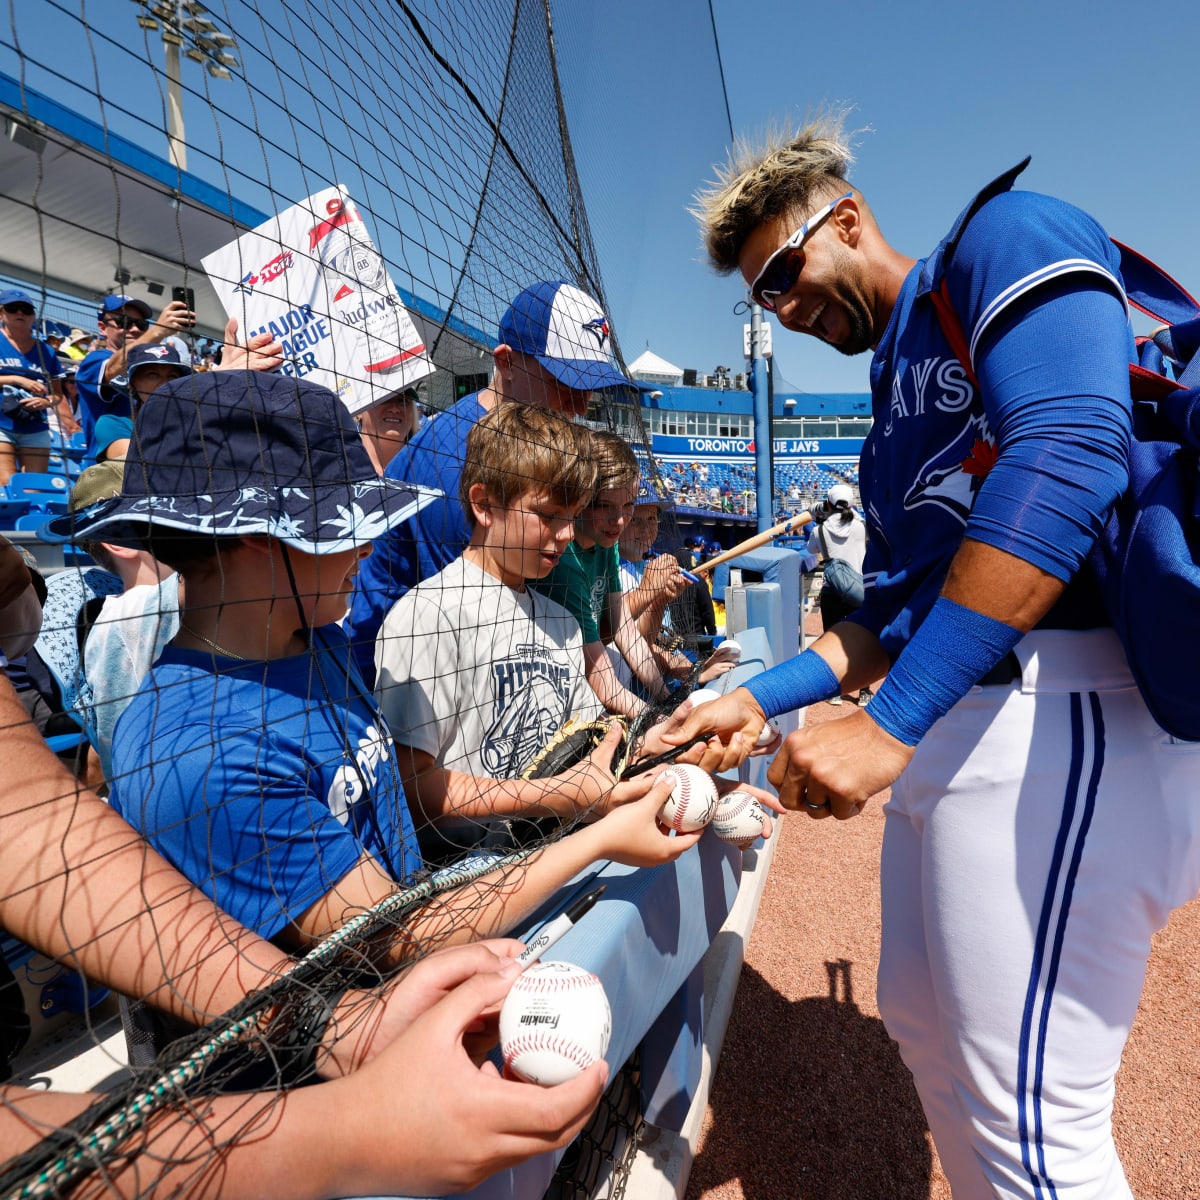 Blue Jays' Spring Home Opener Records Stunningly High TV